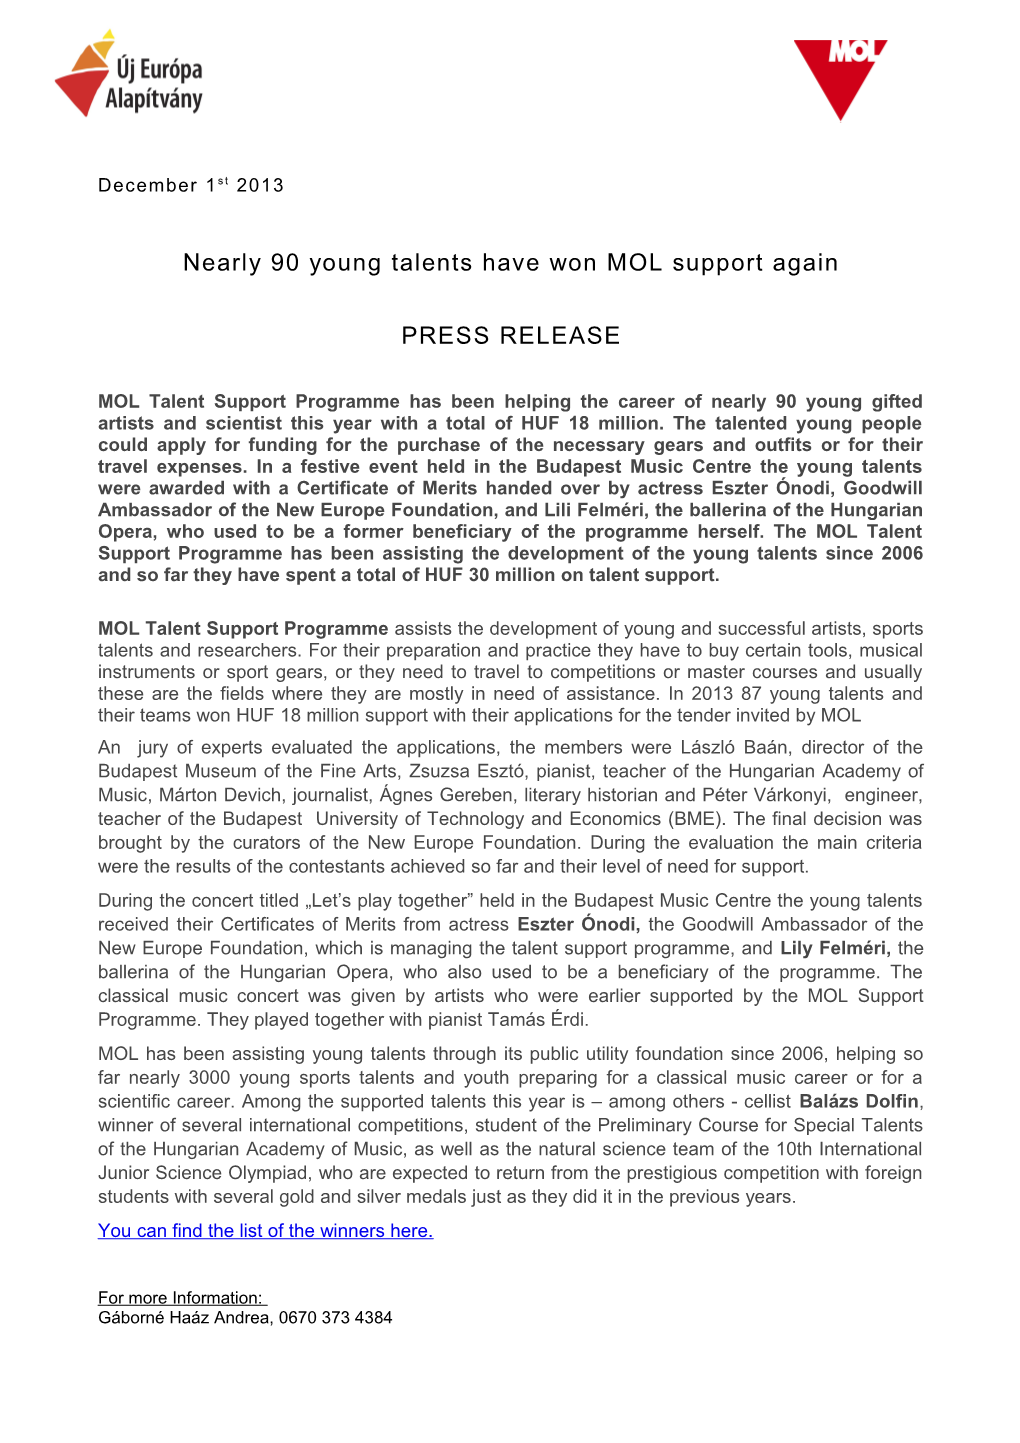 Nearly90 Young Talents Have Won MOL Support Again